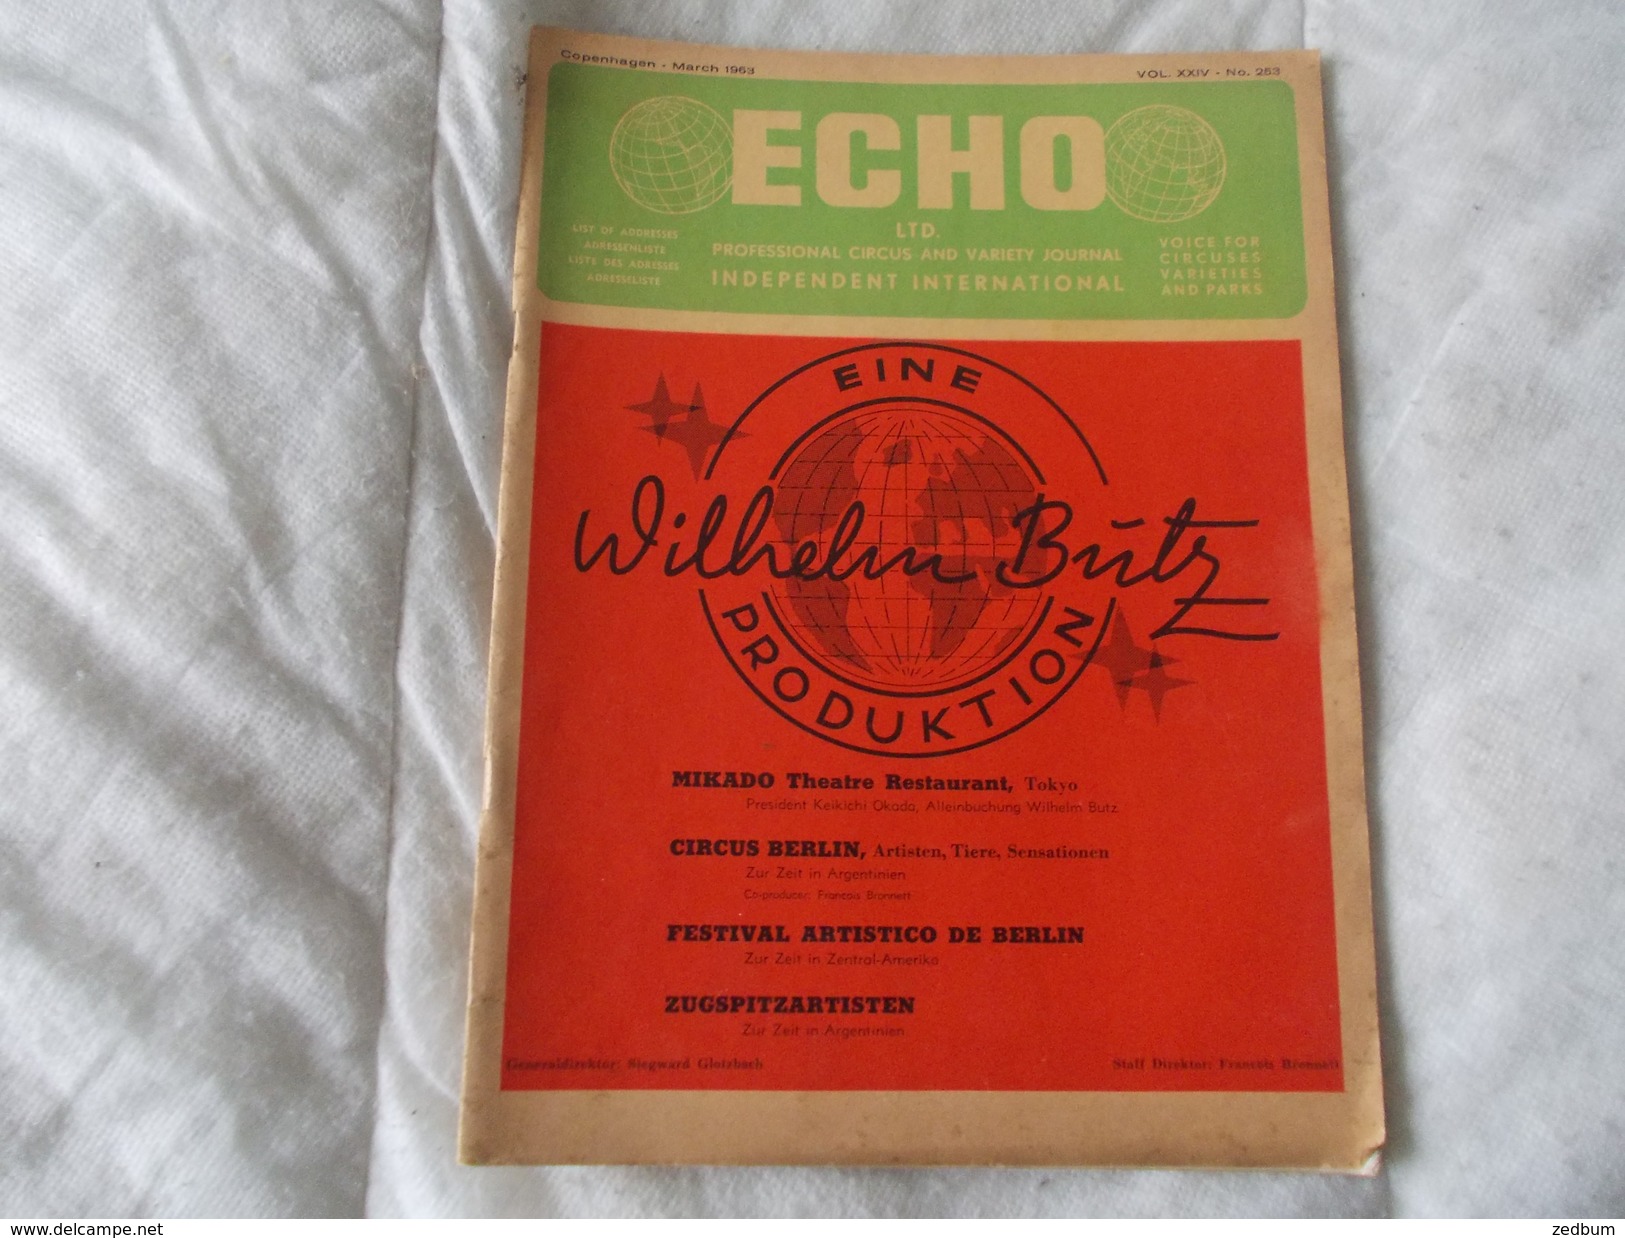 ECHO LTD Professional Circus And Variety Journal Independent International N° 253 March 1963 - Divertimento